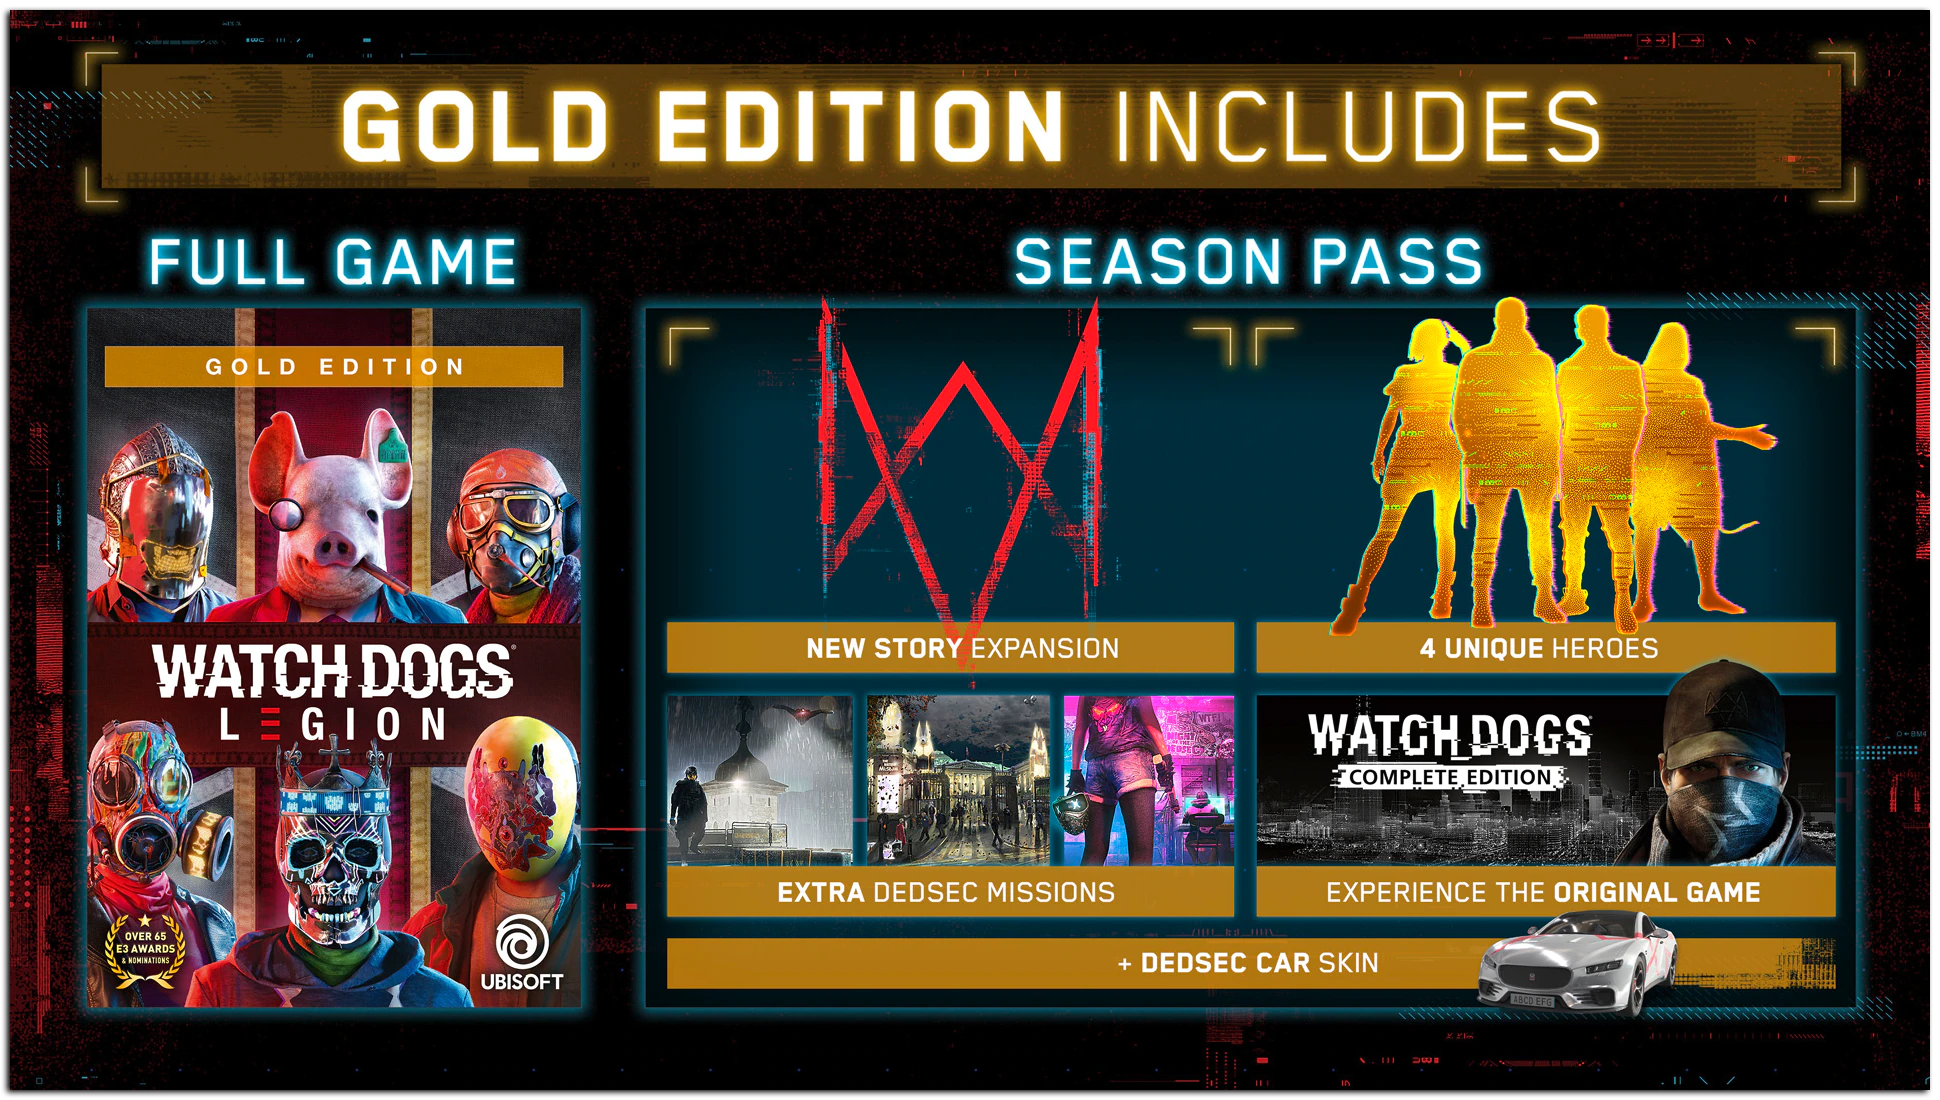 Watch Dogs Legion - Gold Edition includes